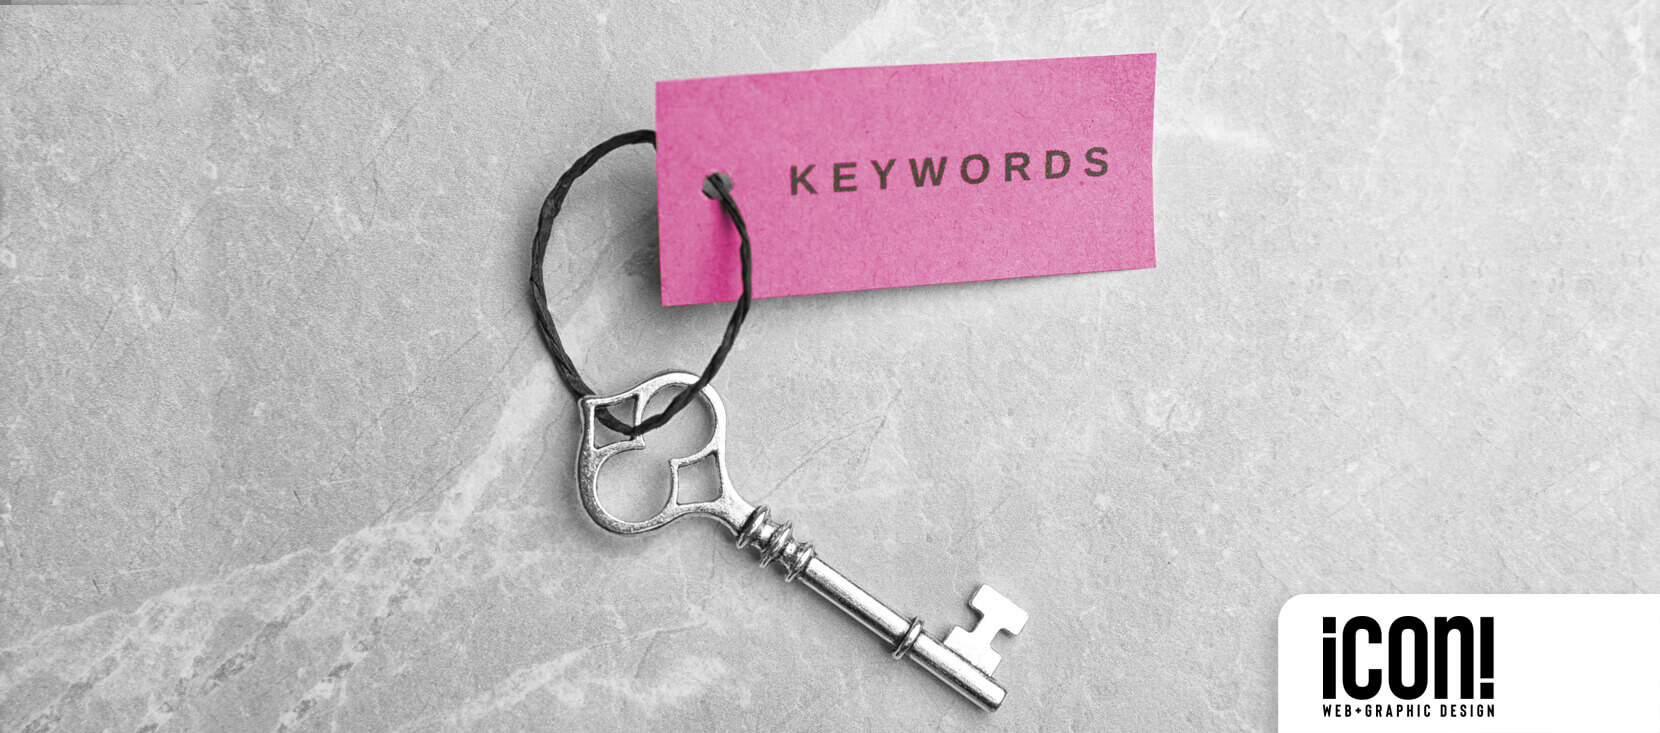 Icon Graphic Design Adelaide blog image of an old fasion key with a pink tag with the words 'keywords' on it in black text.